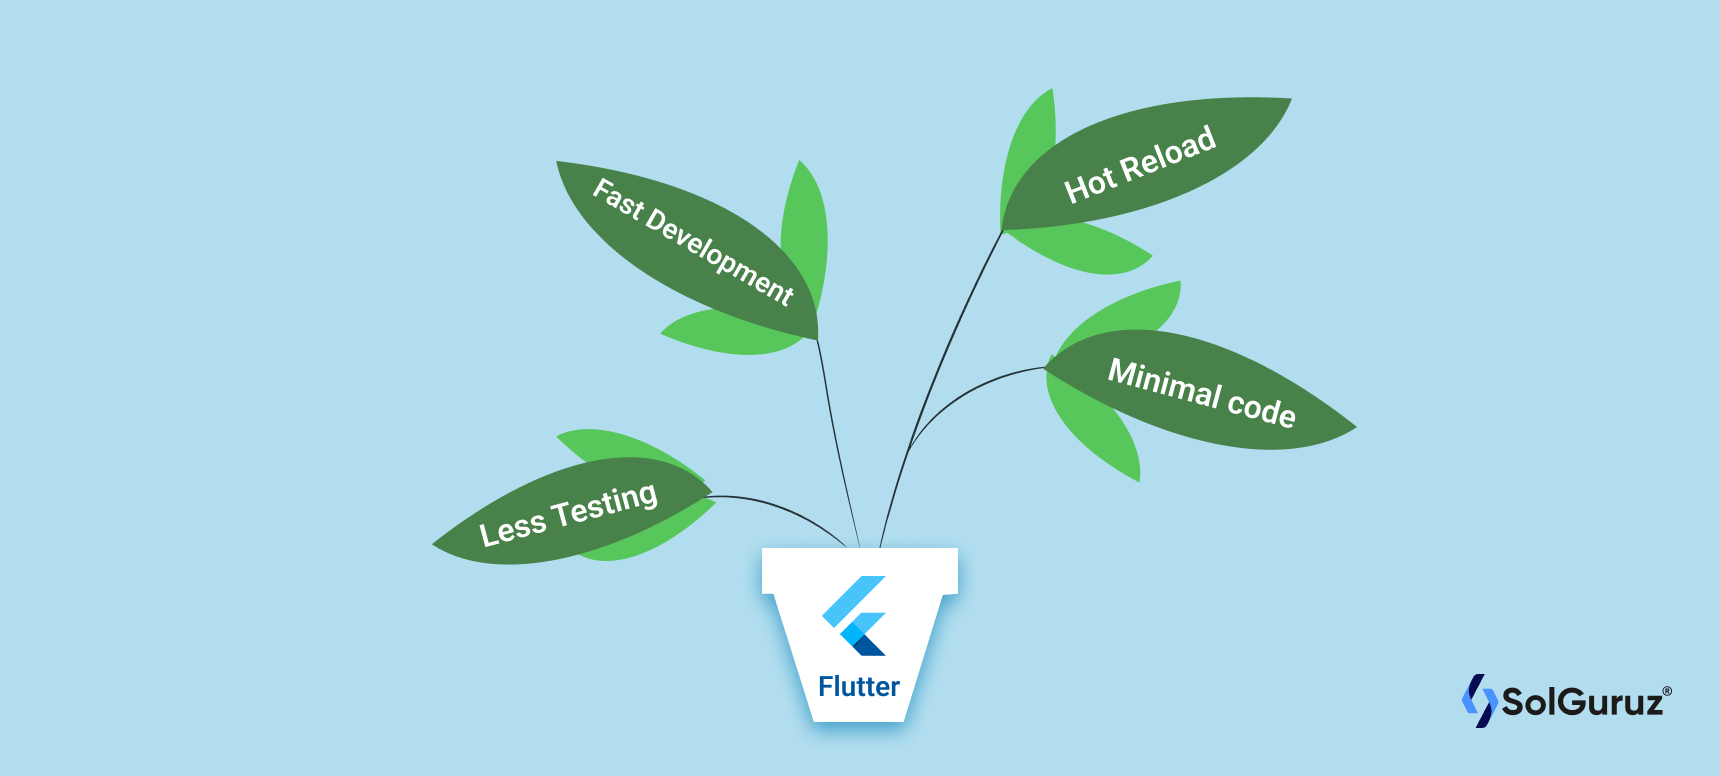 What is Flutter